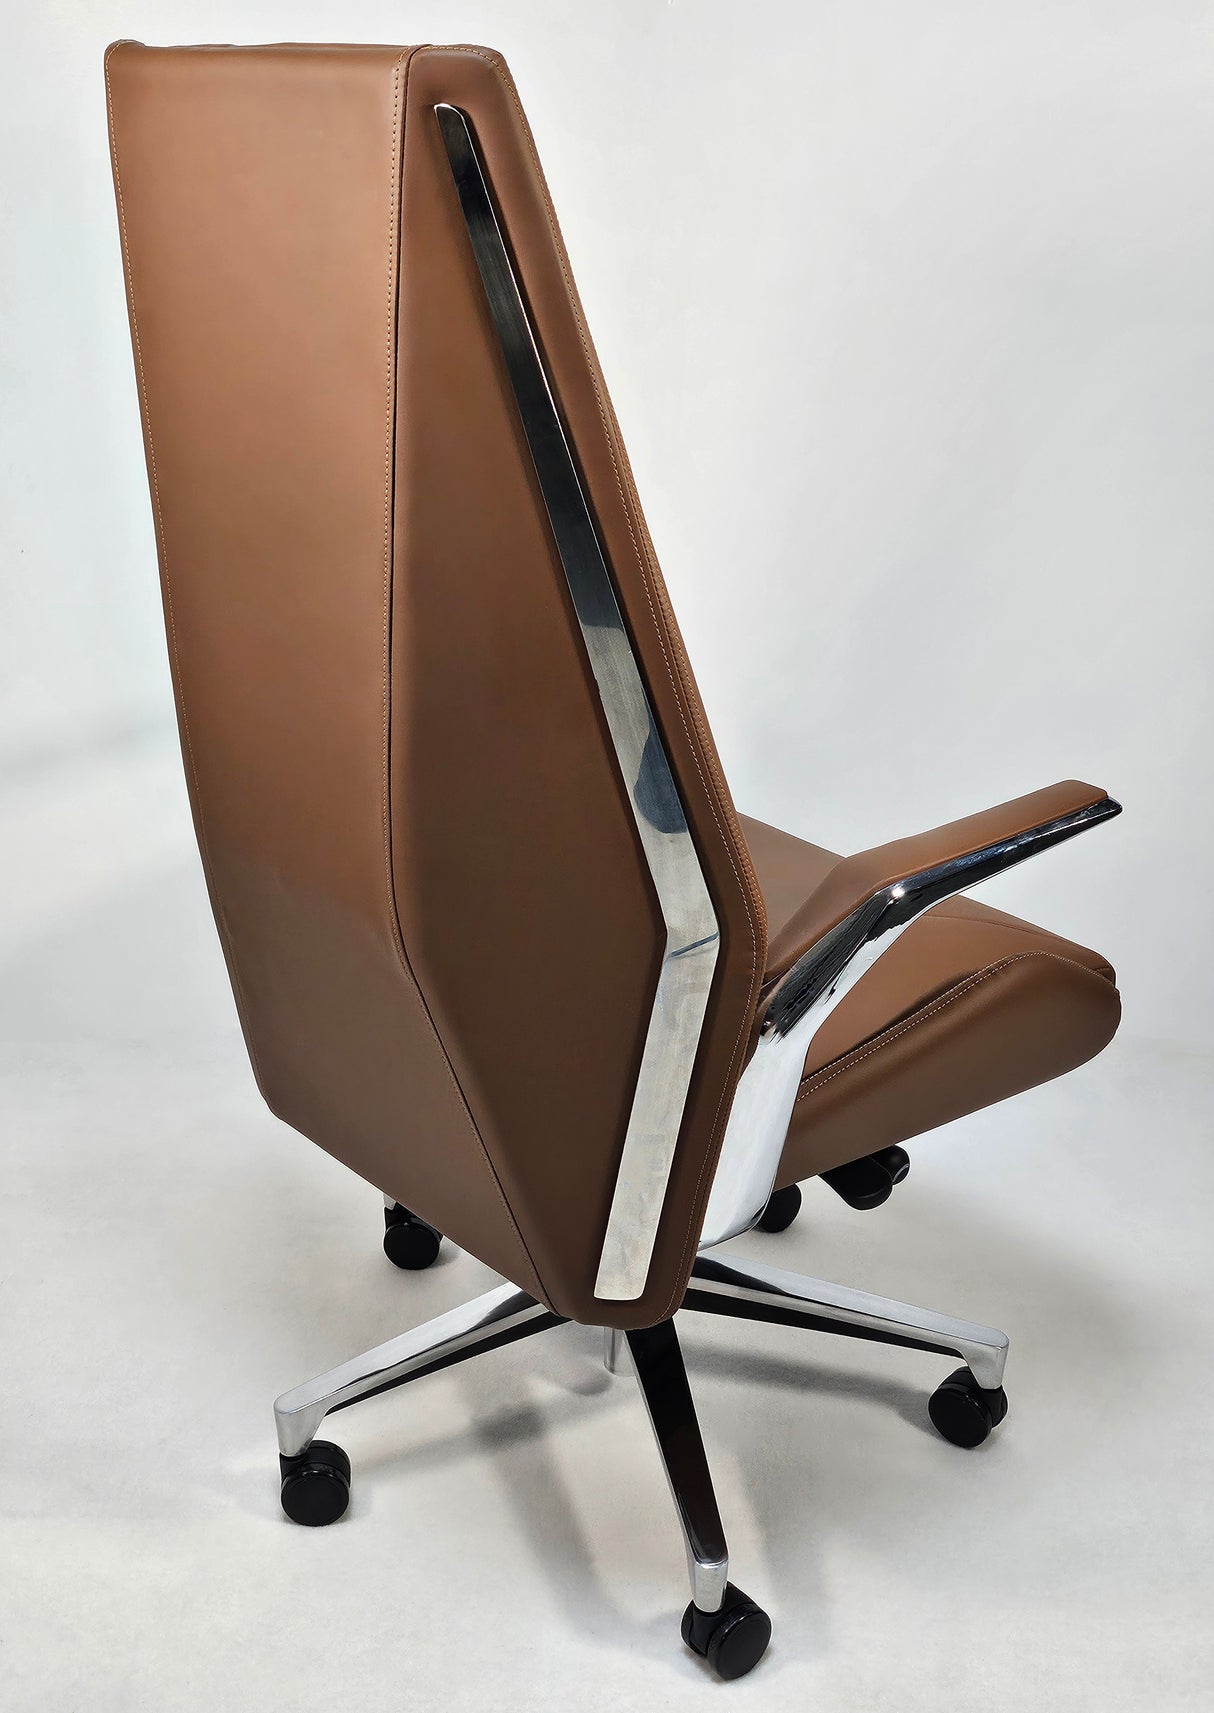 Quality Modern Heavy Duty Office Chair in Tan Leather - DT-8530